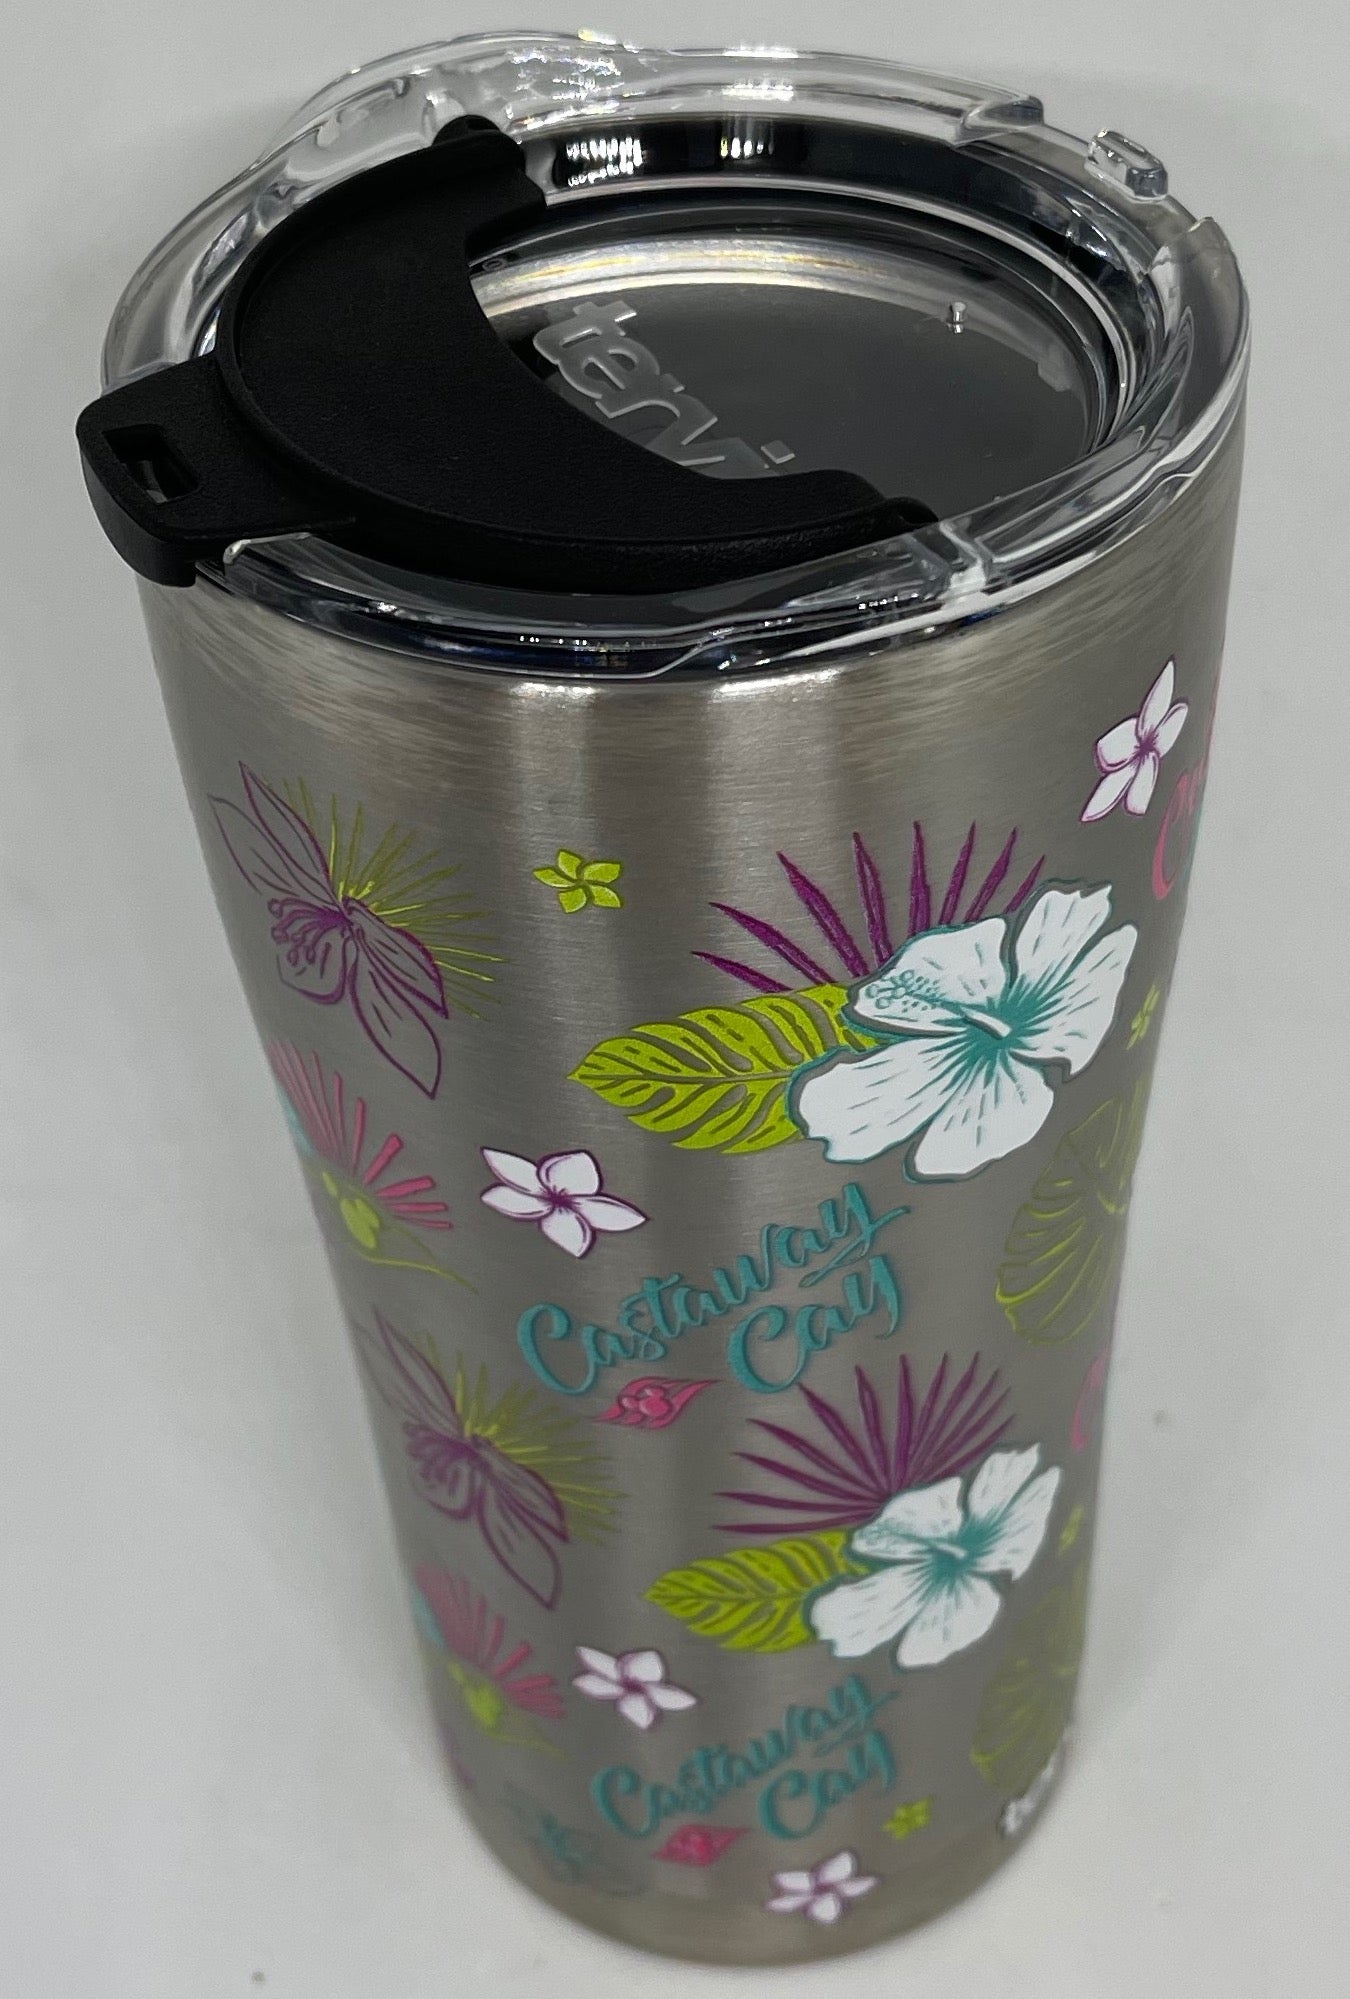 Disney Cruise Line Castaway Cay 20oz Tervis Stainless Tumbler with Lid New